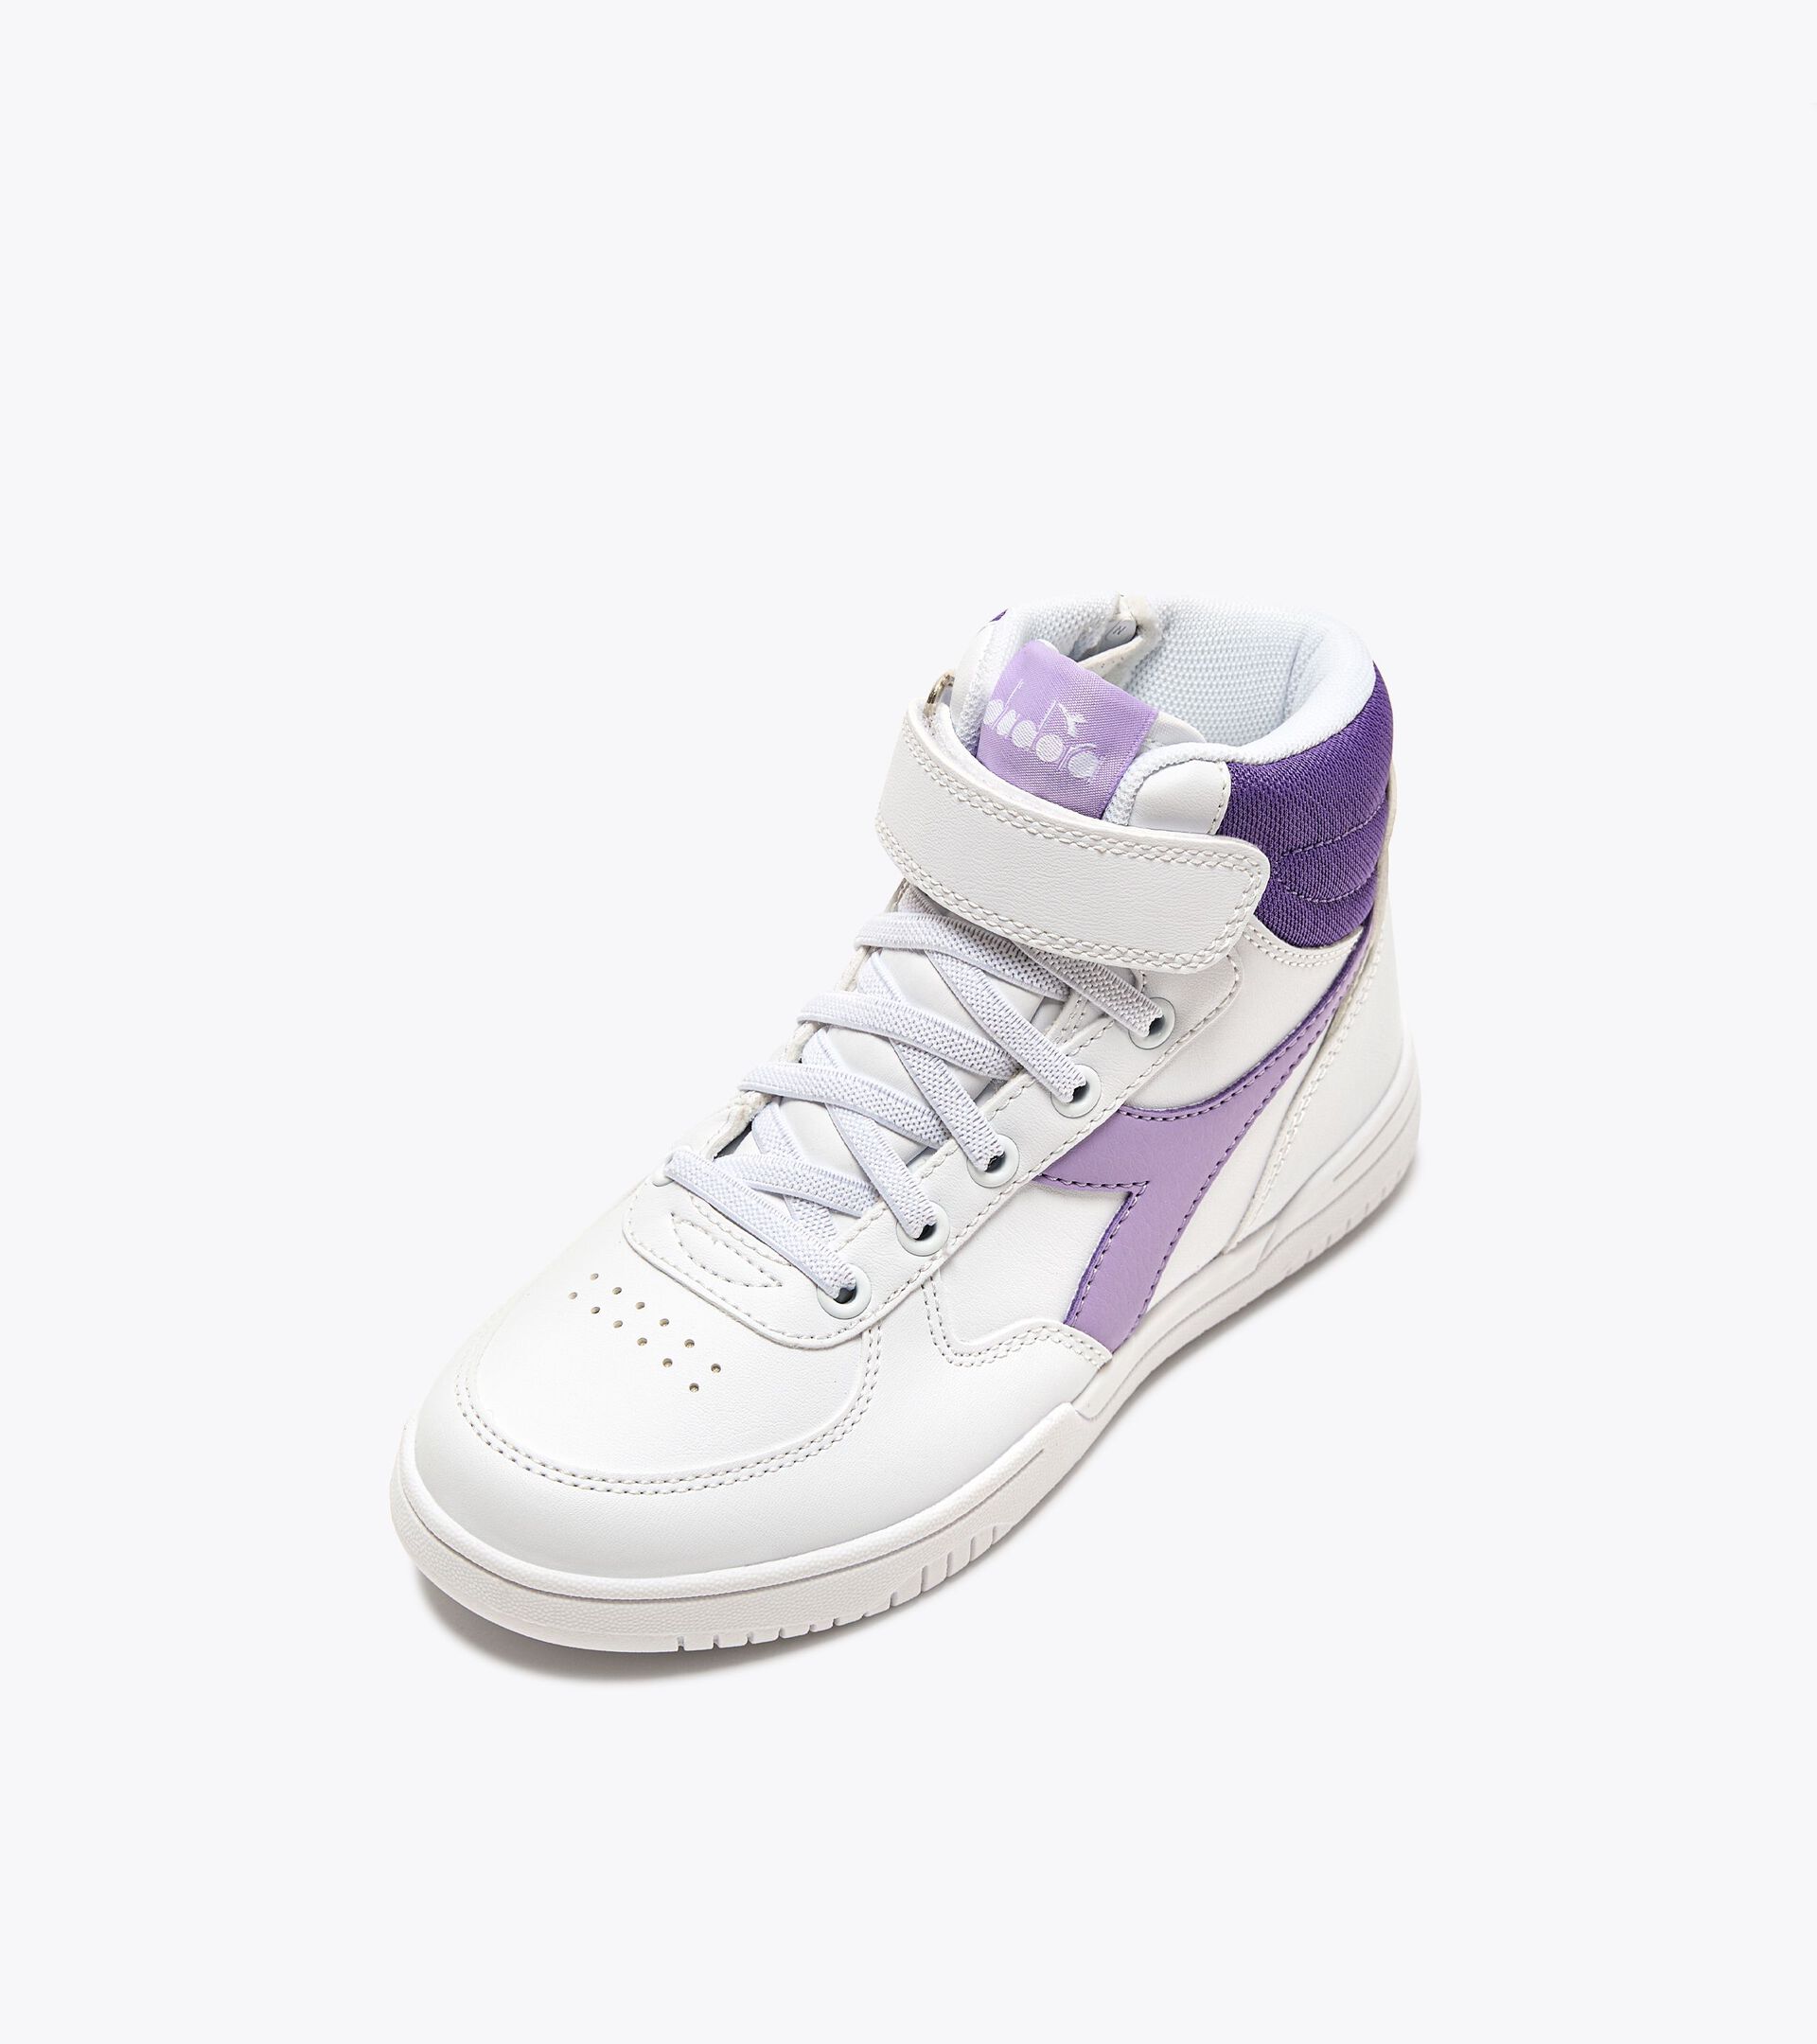 Sports shoes - Kids 4-8 years RAPTOR MID PS WHT/PURPLE ROSE/PASSION FLOWER - Diadora